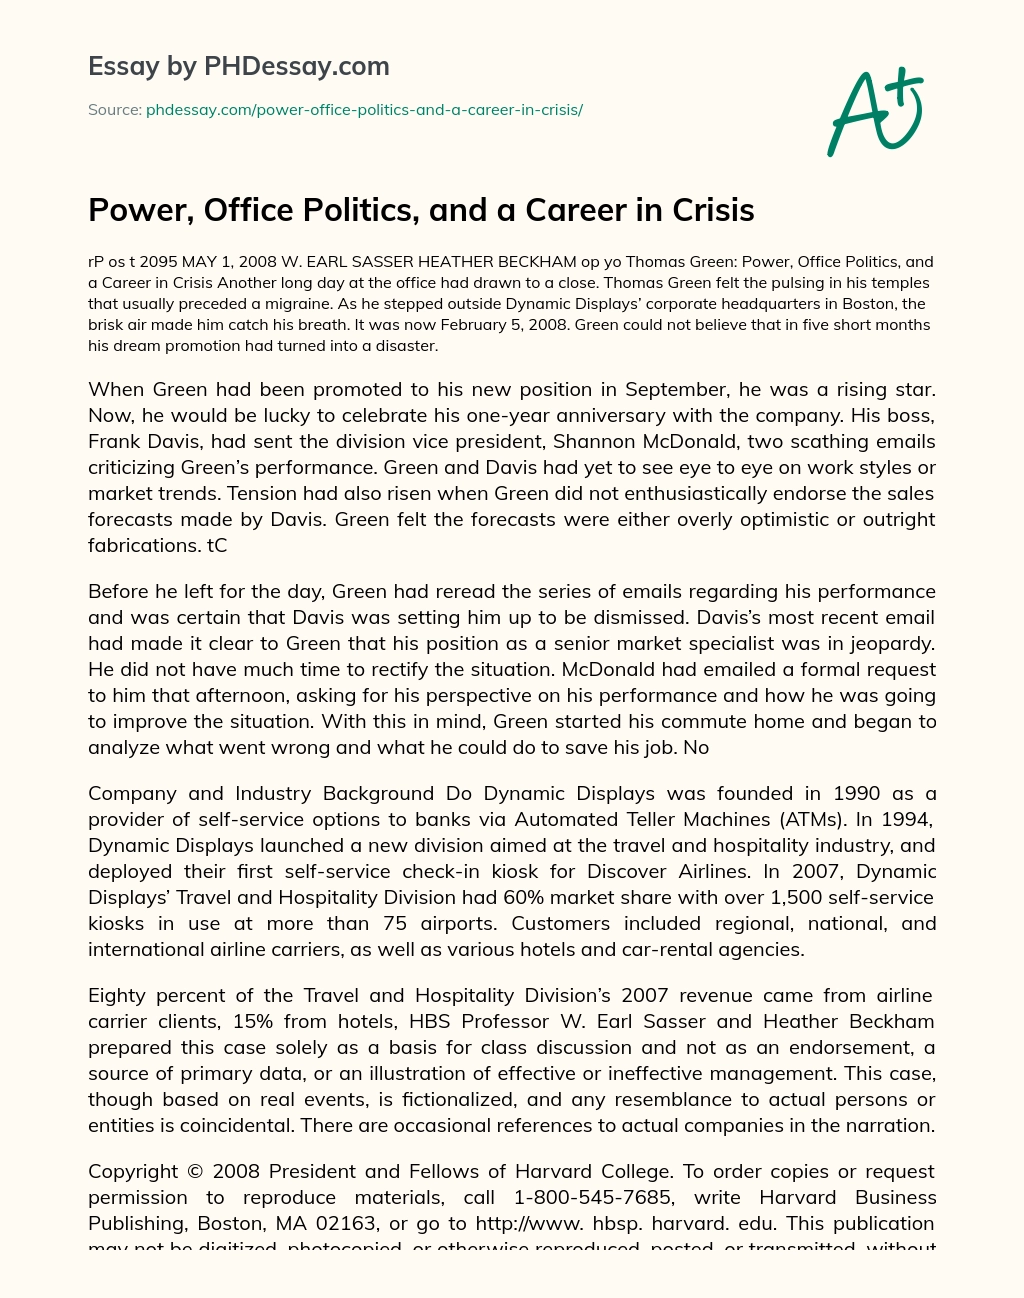 Power, Office Politics, and a Career in Crisis essay